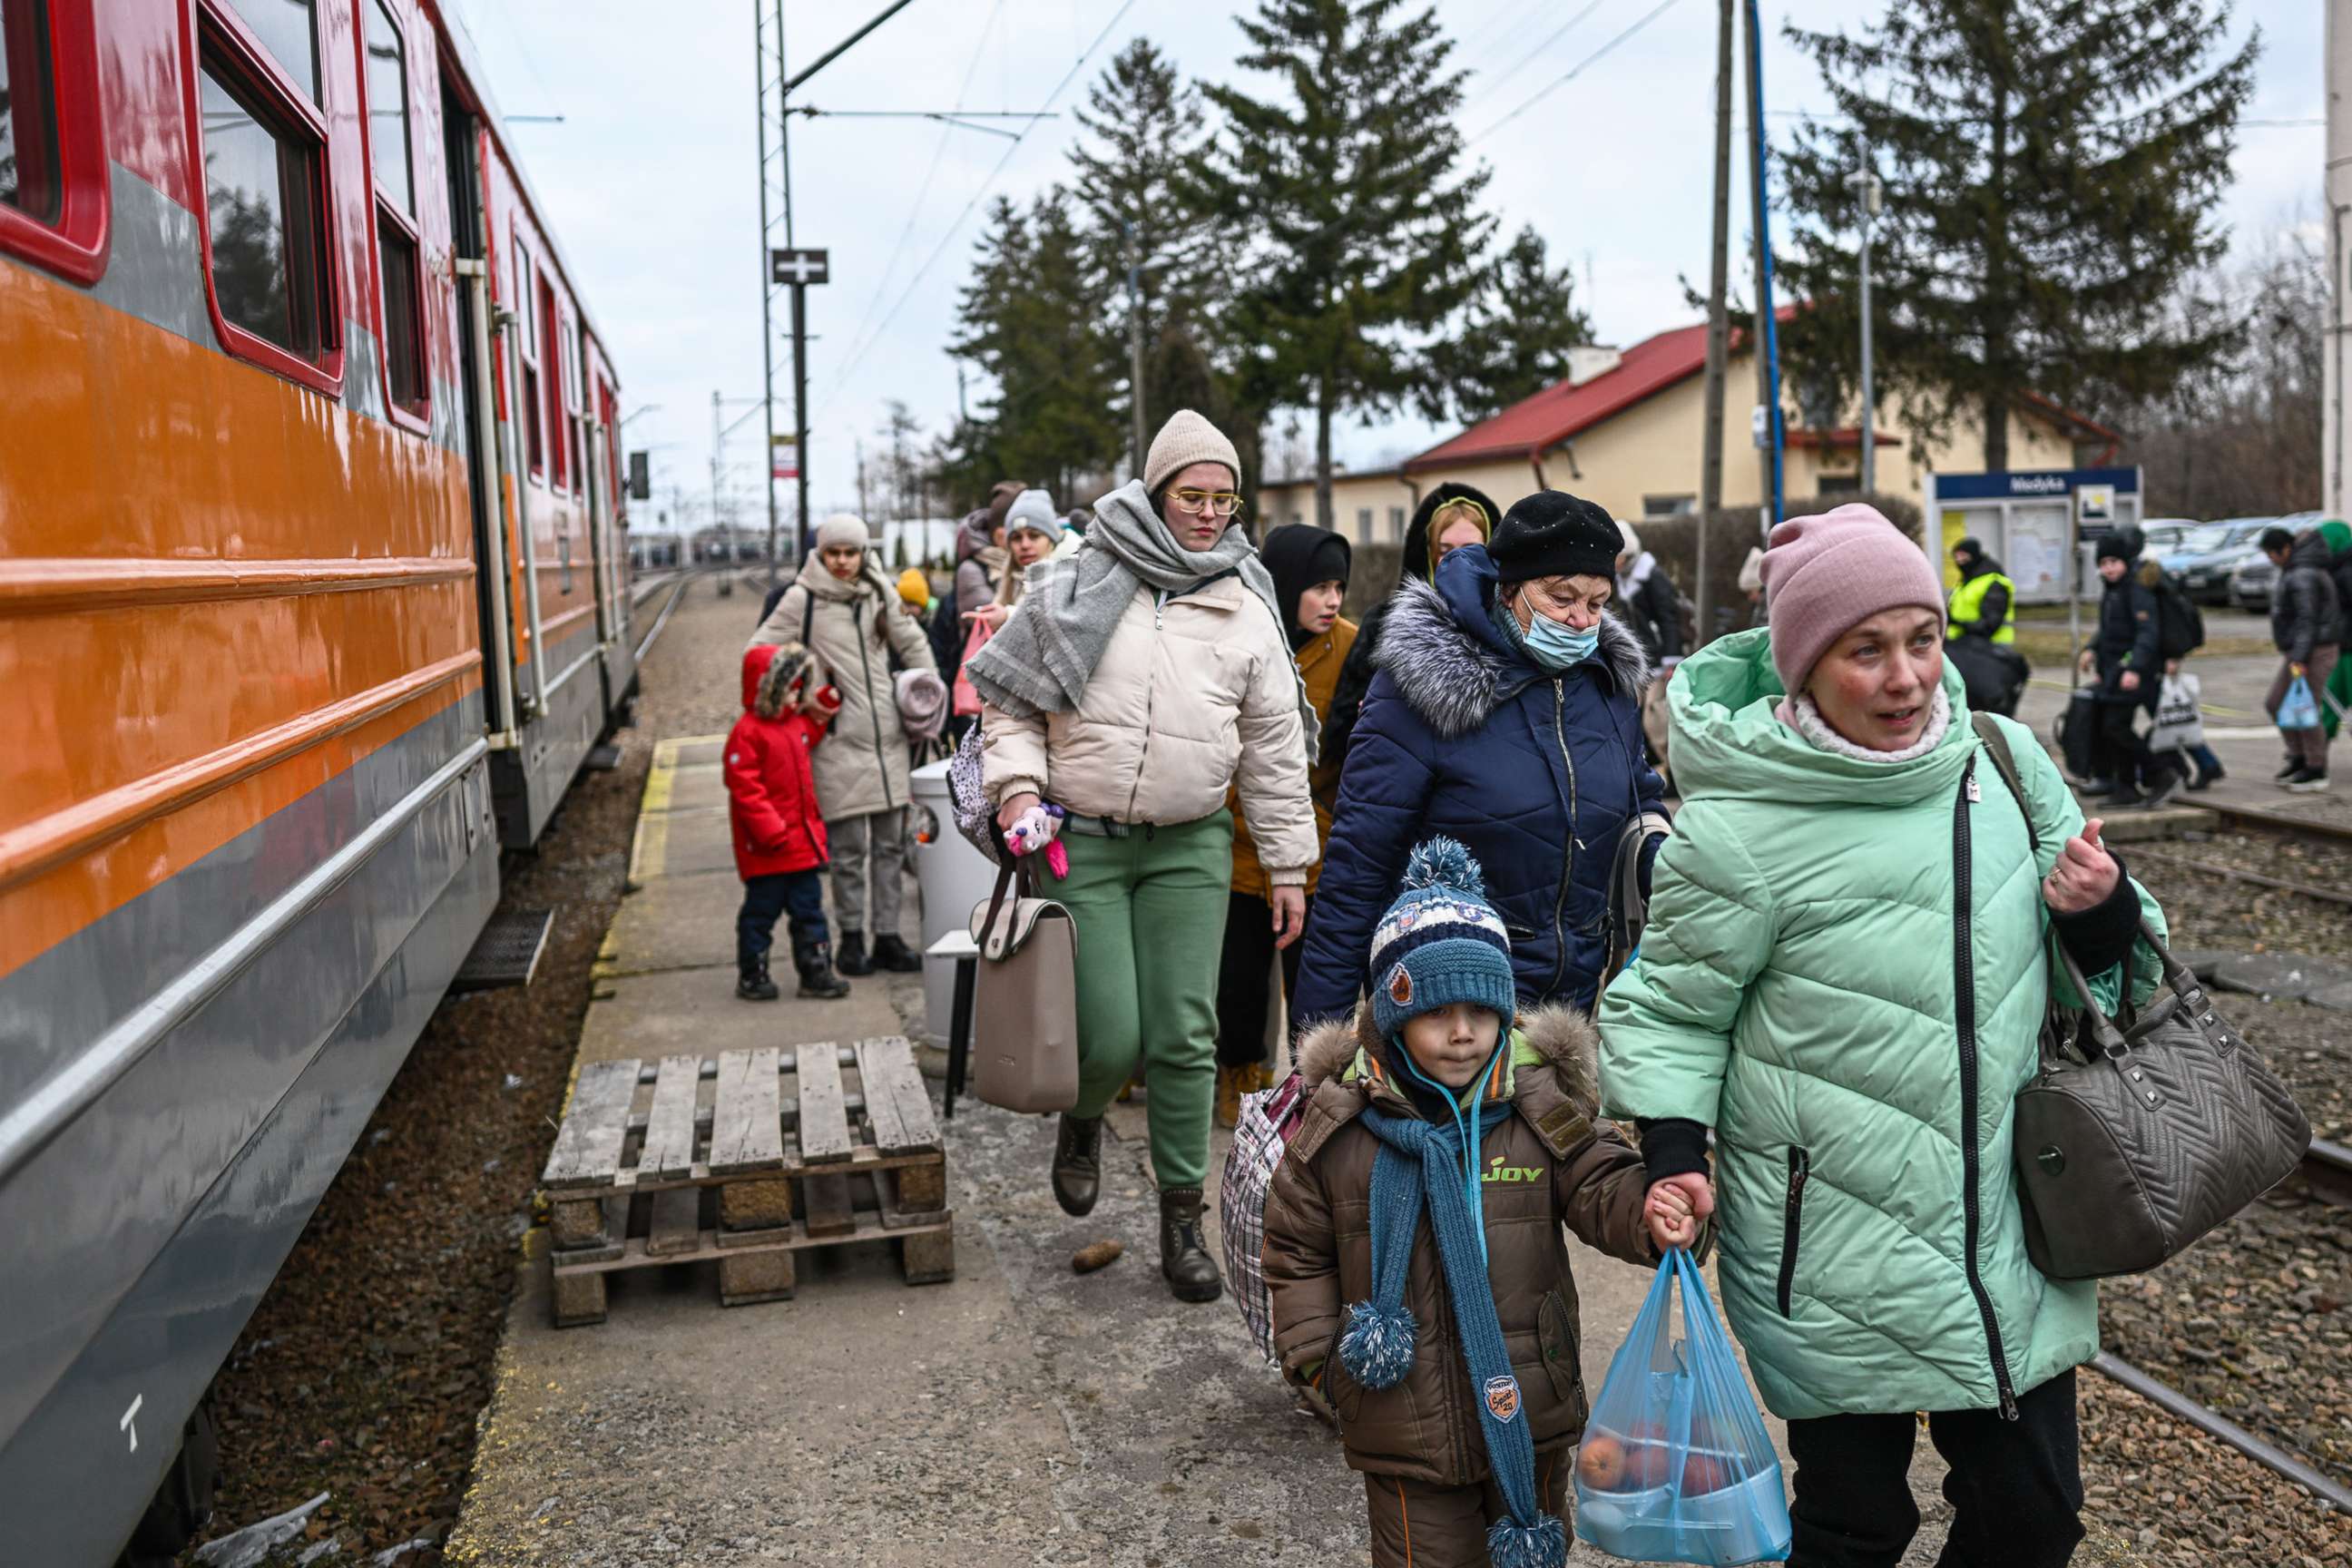 PHOTO: Women and children who have fled war-town Ukraine walk to board a train to transport them to Przemysl main train station after crossing the Polish Ukrainian border crossing on March 10, 2022 in Medyka, Poland.